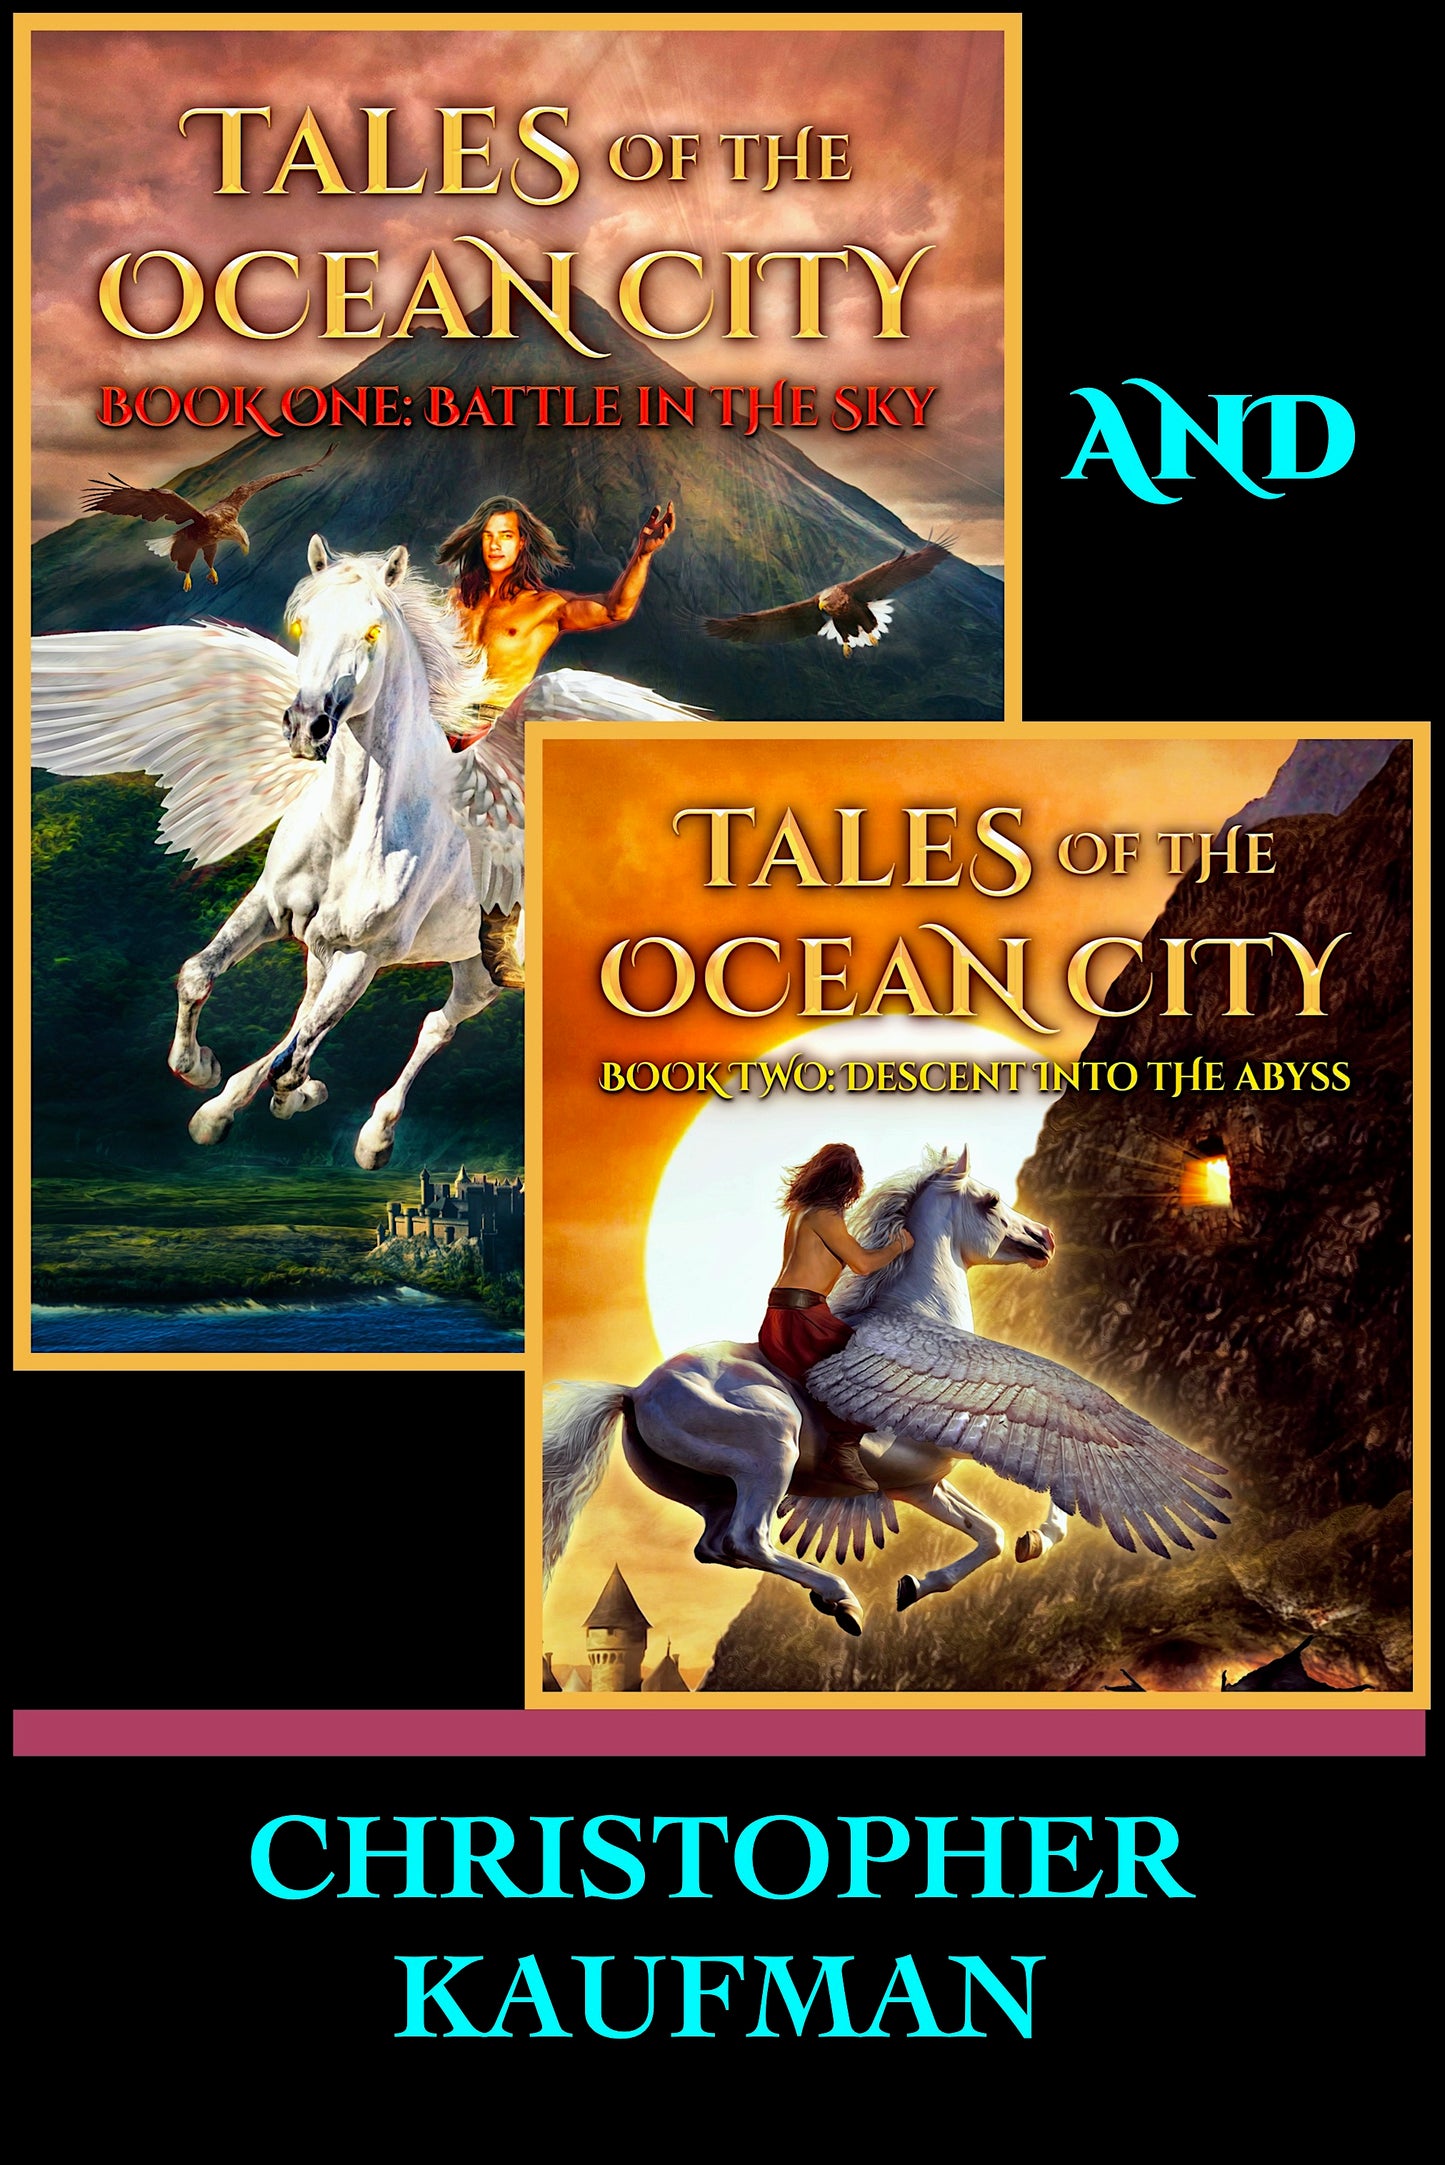 TALES OF THE OCEAN CITY : Book Two: Descent Into The Abyss